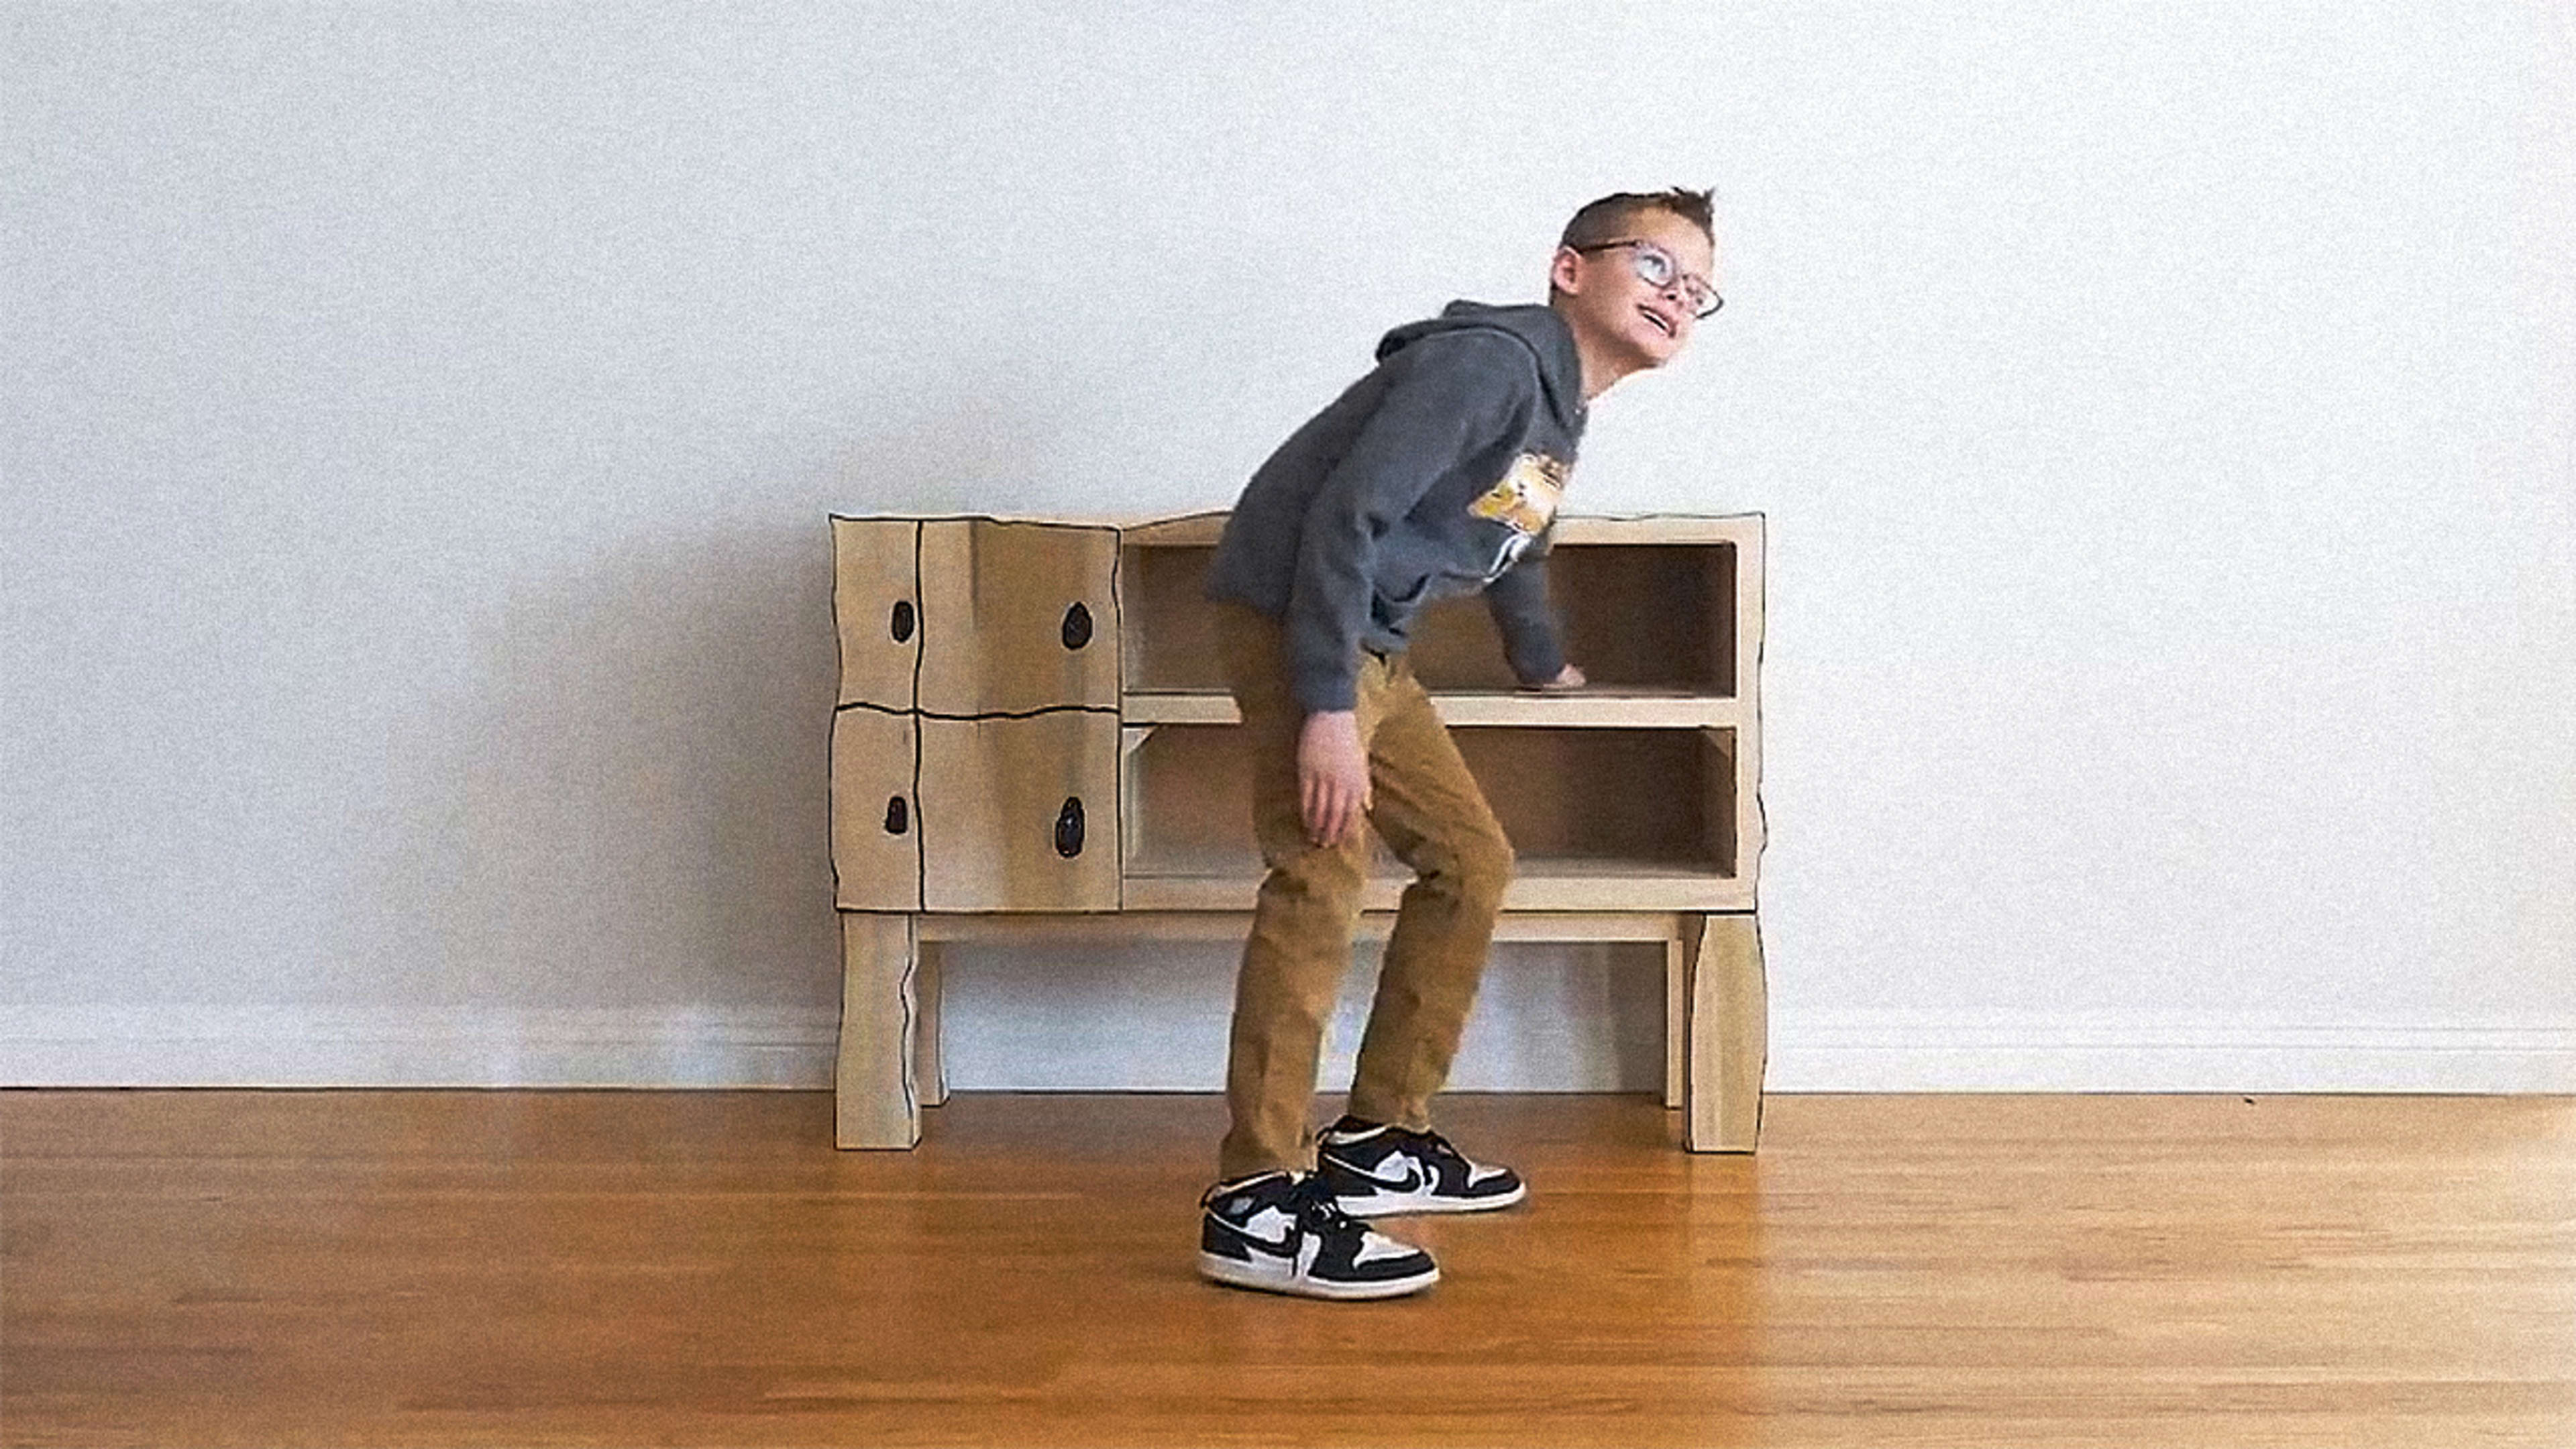 Hero dad turns his son’s sketch into a real dresser